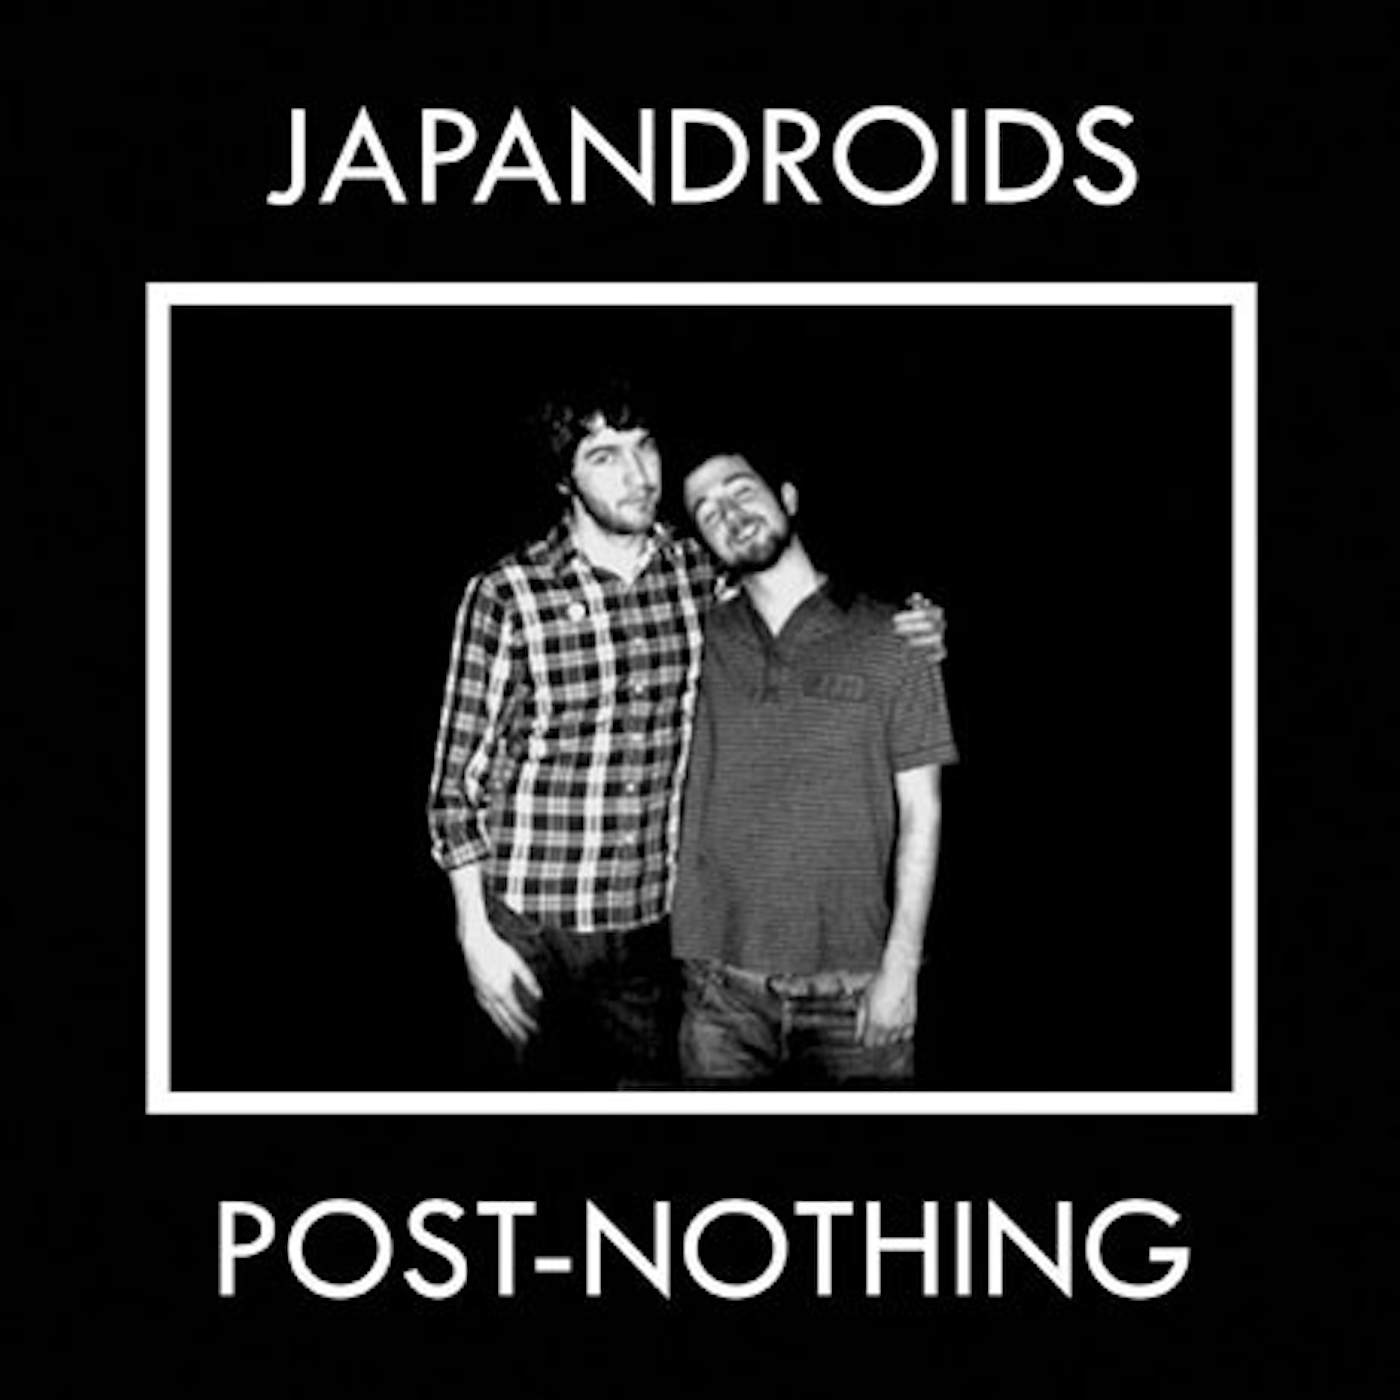 Japandroids Post-Nothing (Vinyl)